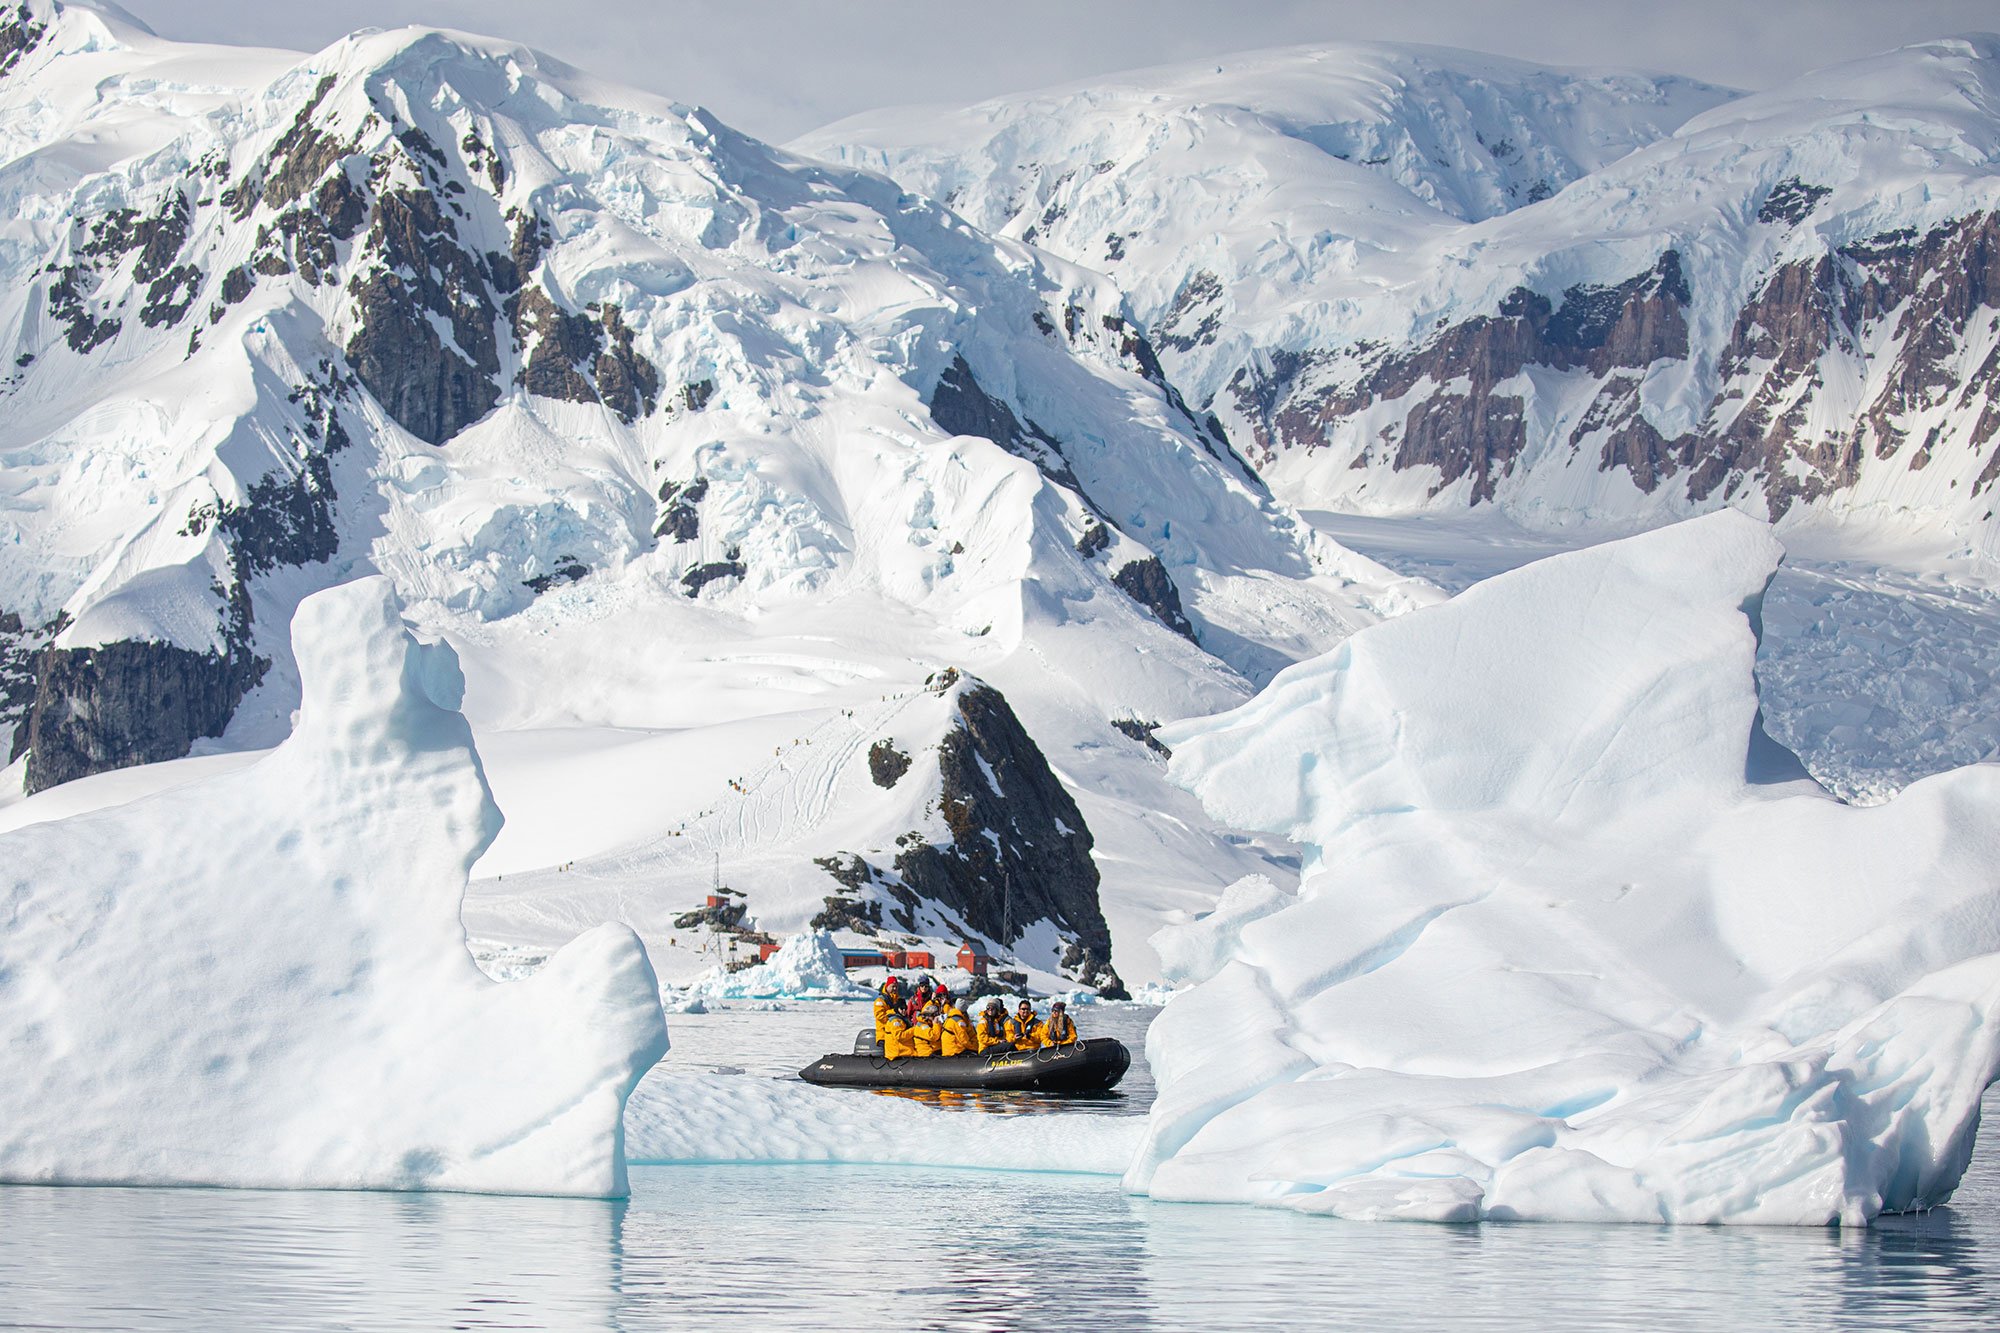 Quark Expeditions guests enjoy a Zodiac cruise in the waters of the Antarctic.